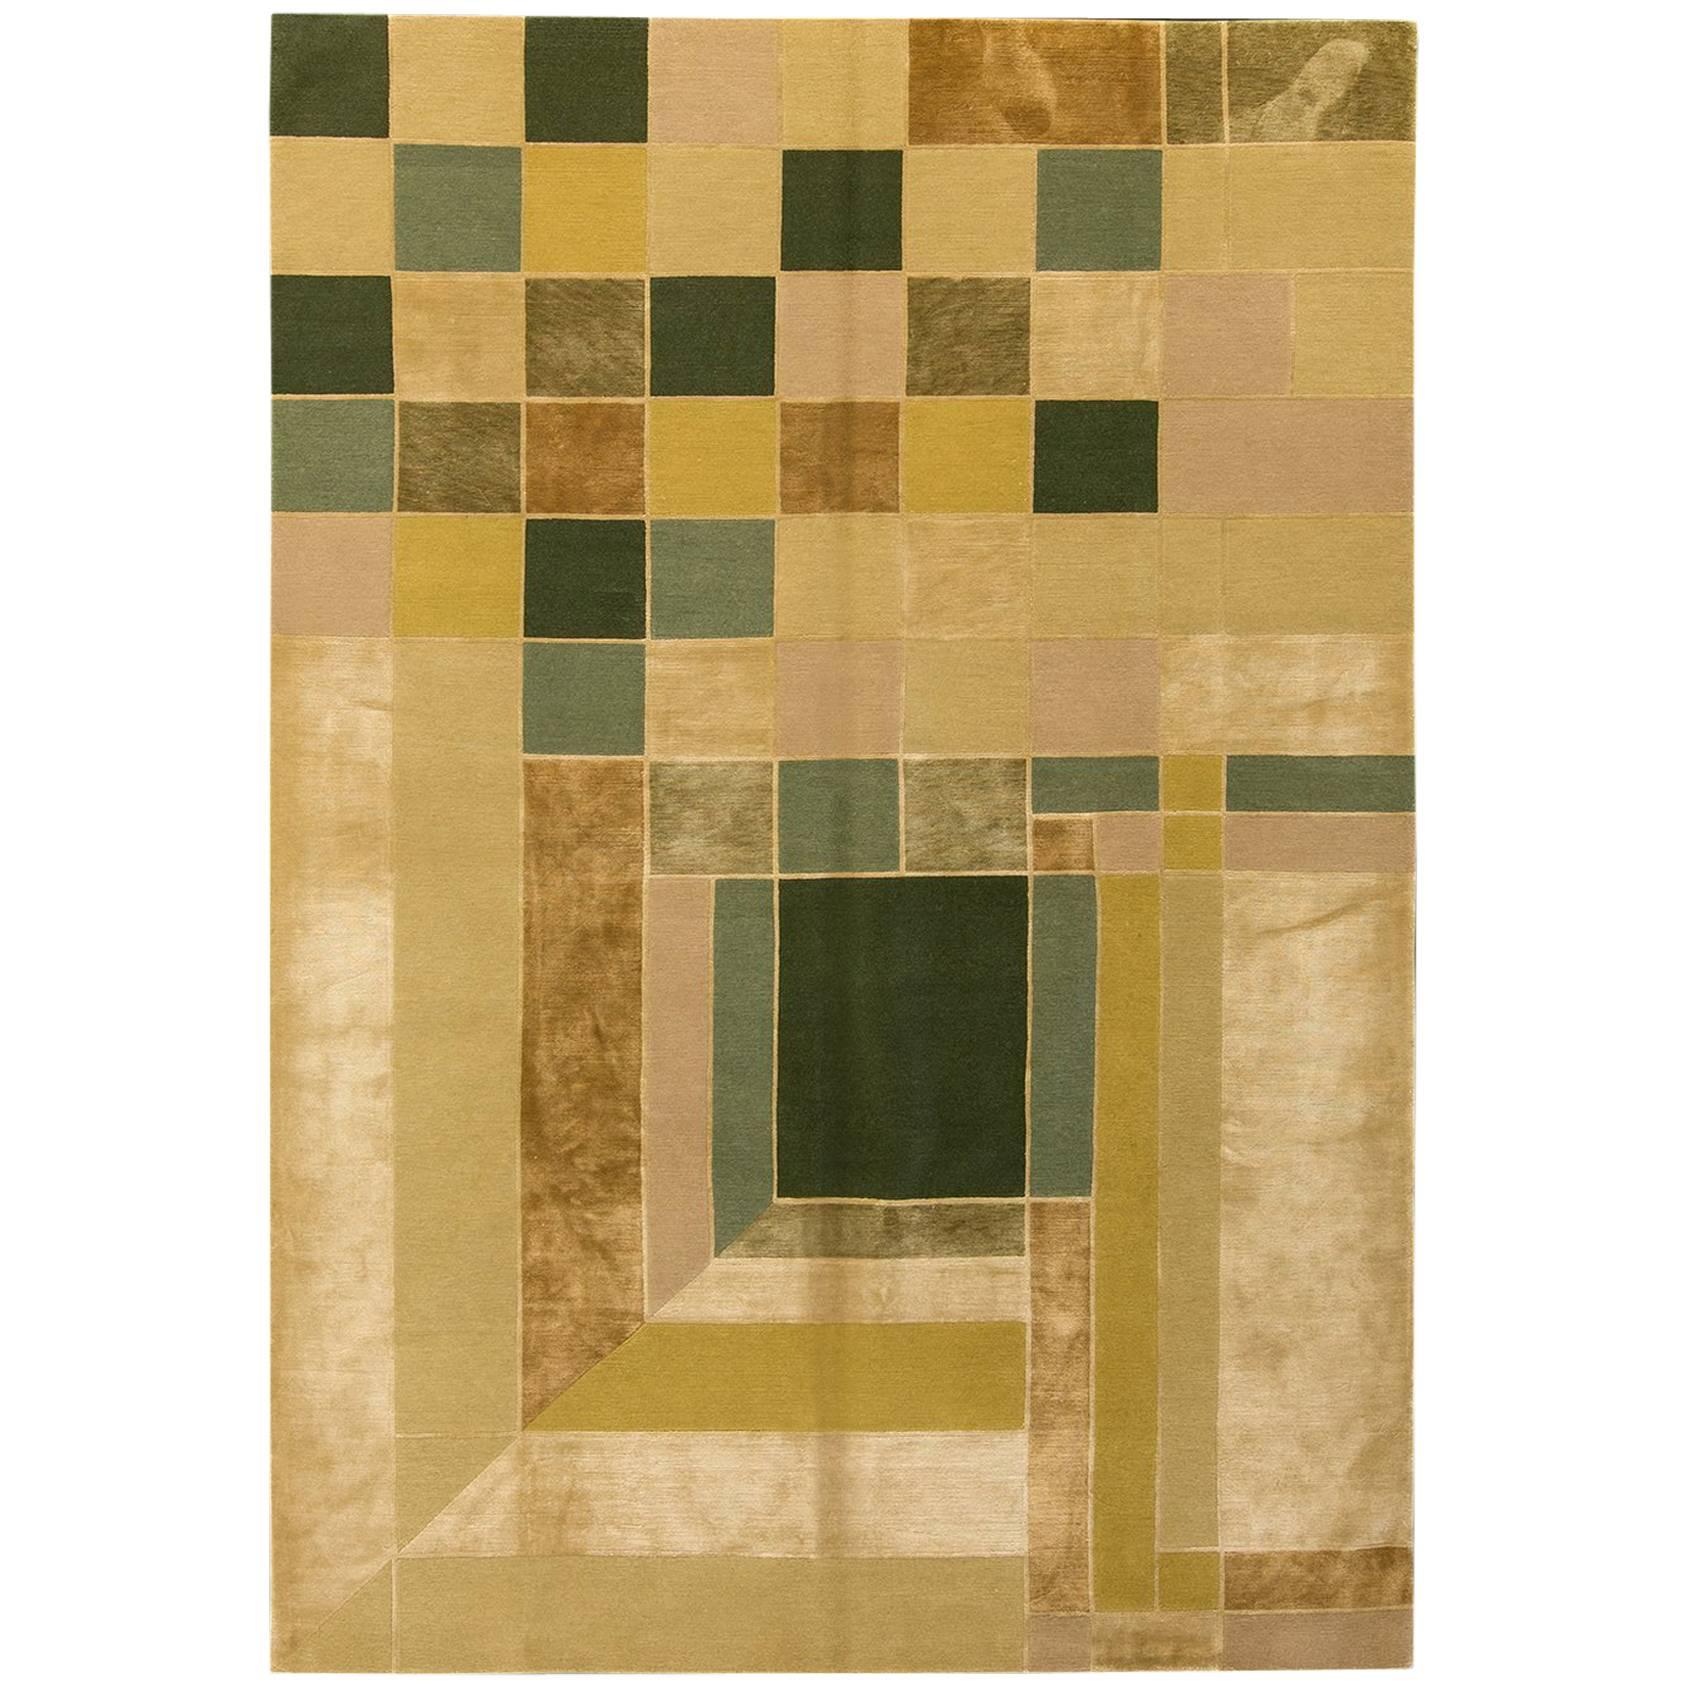 (After) Frank Lloyd Wright Garden Windows Rug, Silk and Wool Hand-Knotted For Sale